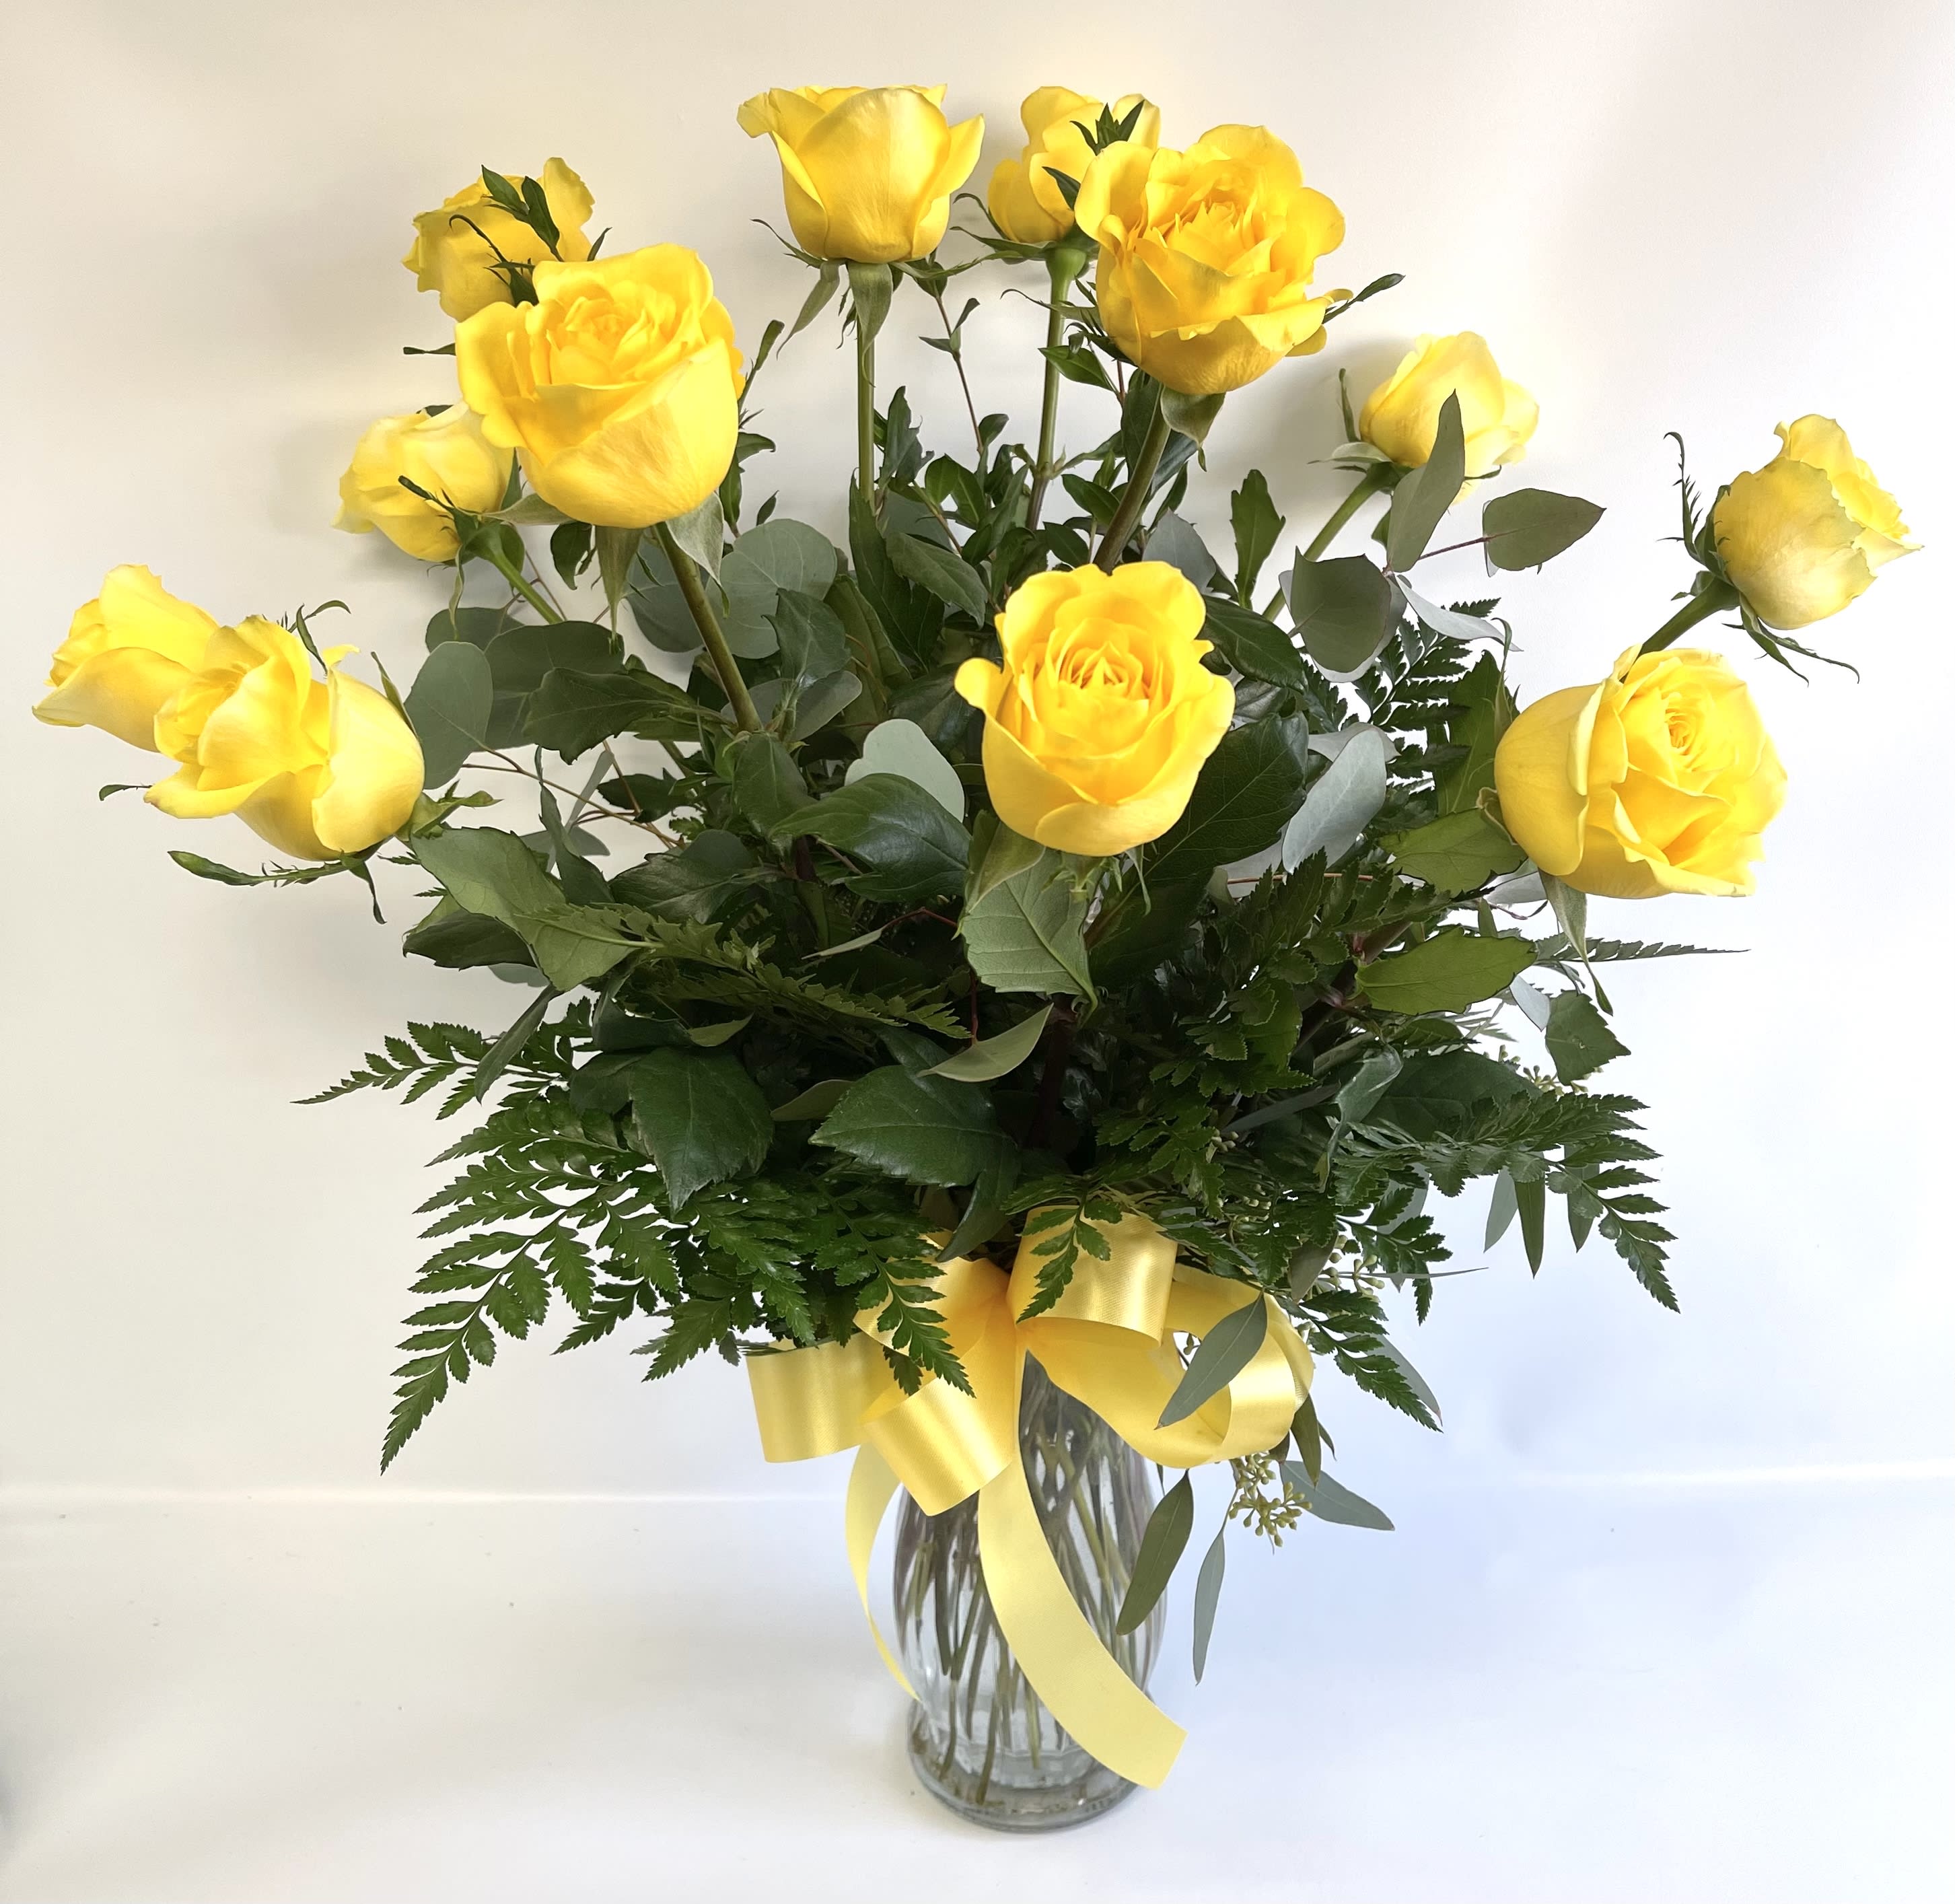 Yellow Roses by Barb’s Flowers - A traditional dozen yellow roses. PREMIUM: Include high end fillers and foliage. 